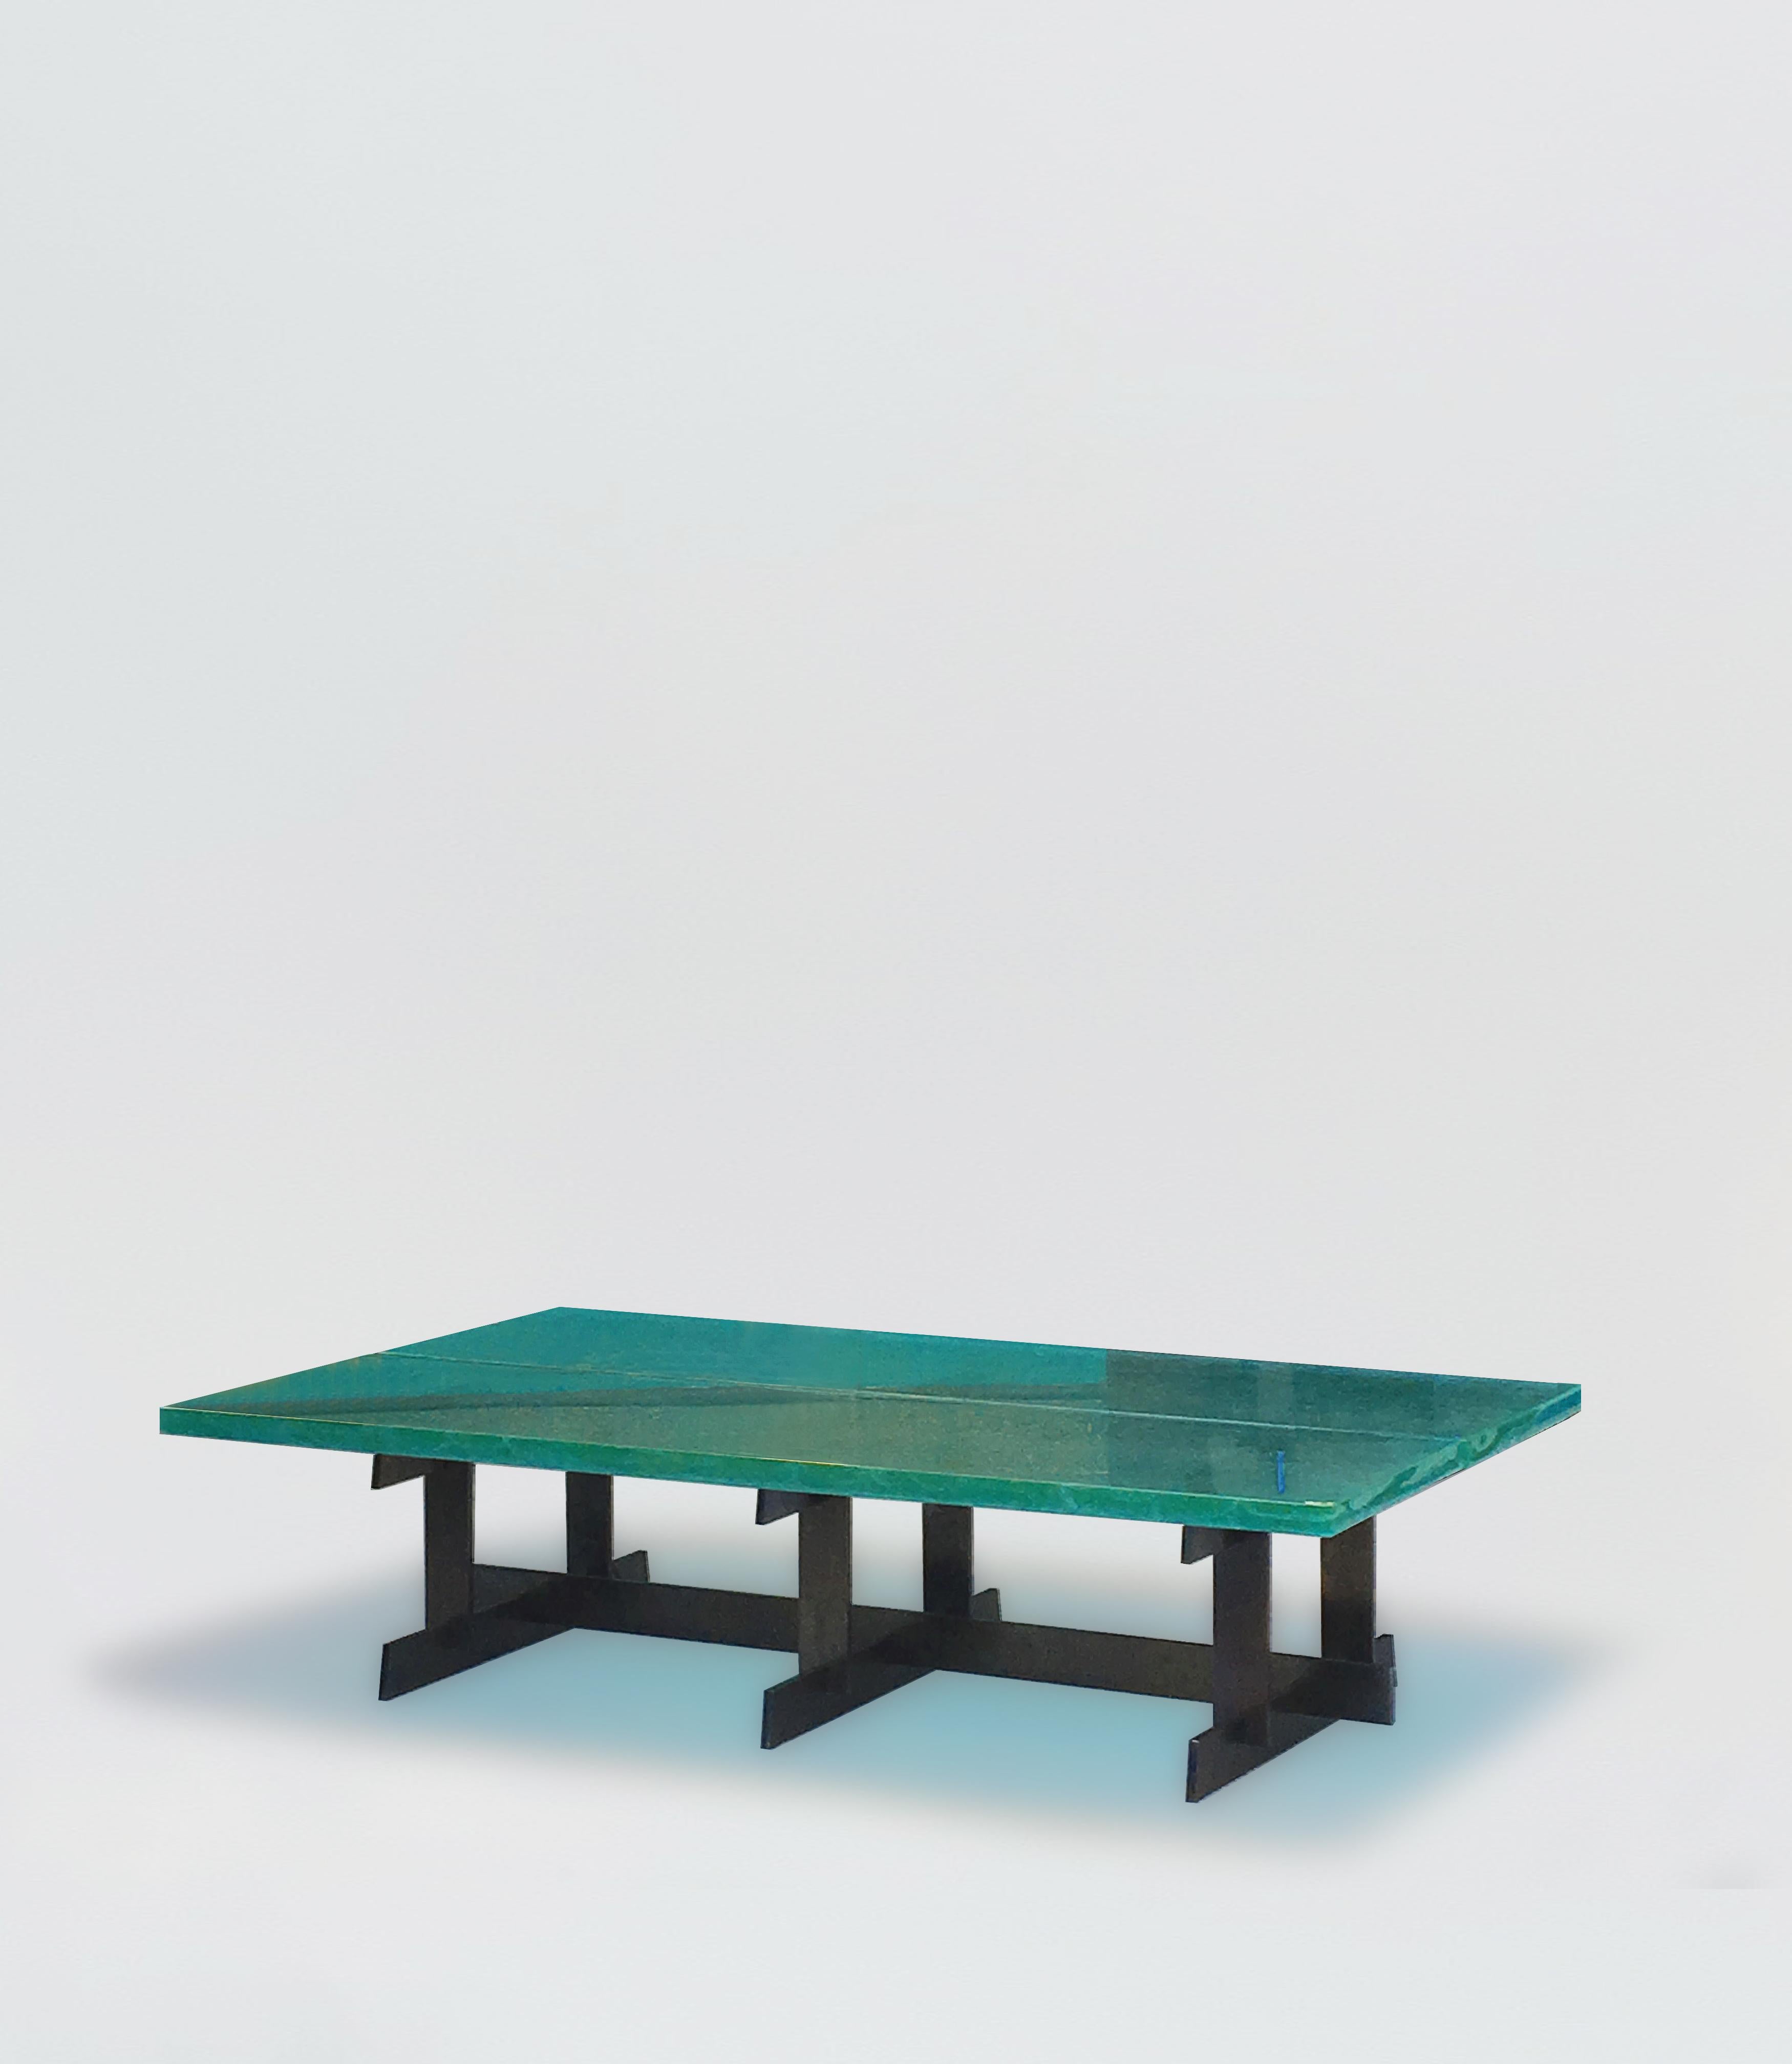 Lava coffee table by SB26
Dimensions: W 160, D 90, H 38 cm
Materials : Thick glass top, hot-rolled mid-iron steel

Lava low table emphasizes the work of the material, in a brutalist expression, with its 35 mm thick glass top, and its